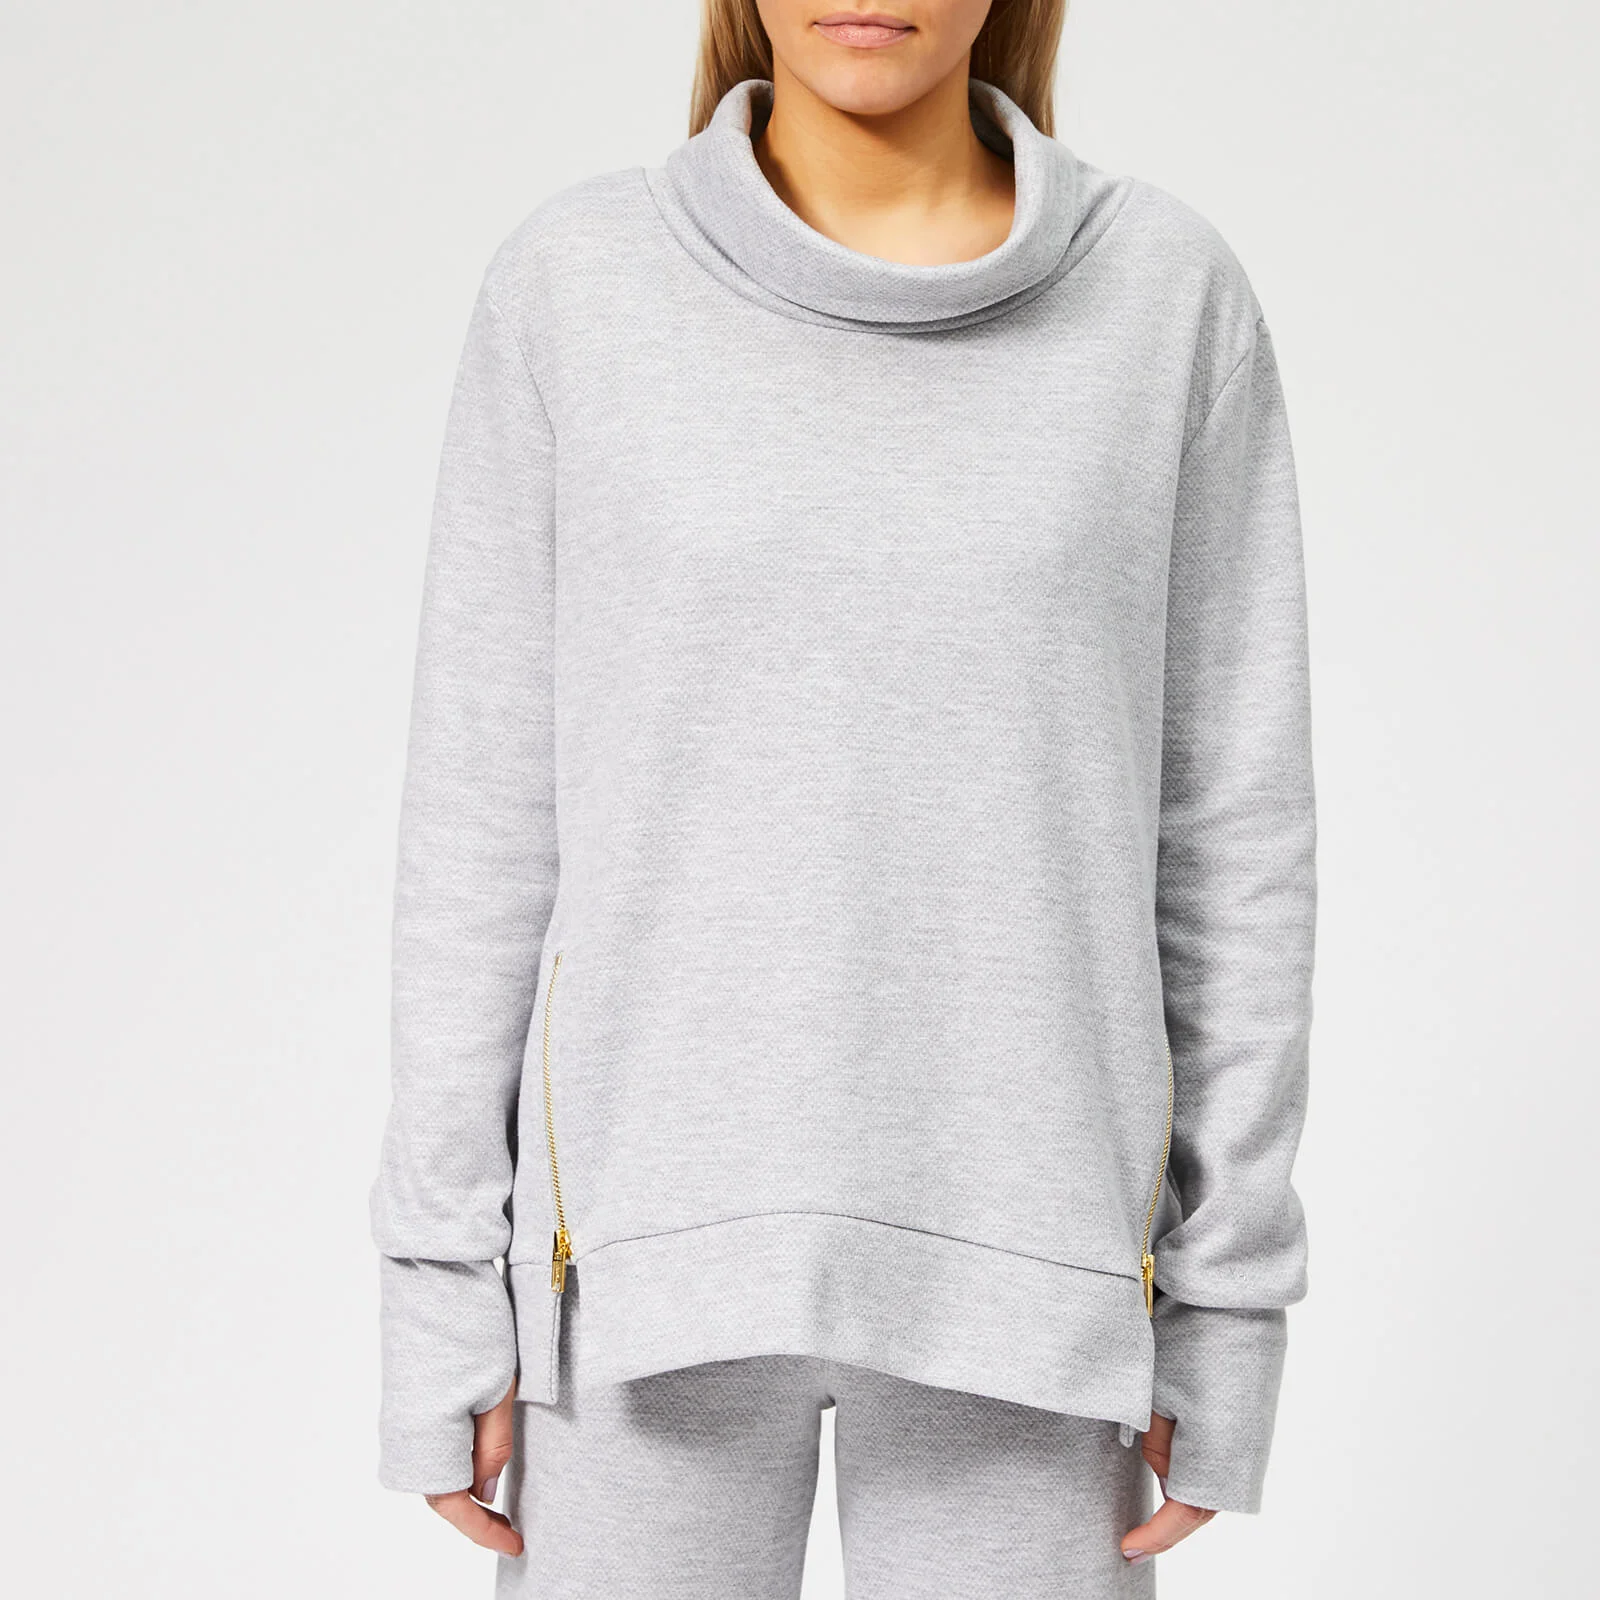 Varley Women's Clement Sweater - Heather Grey Image 1